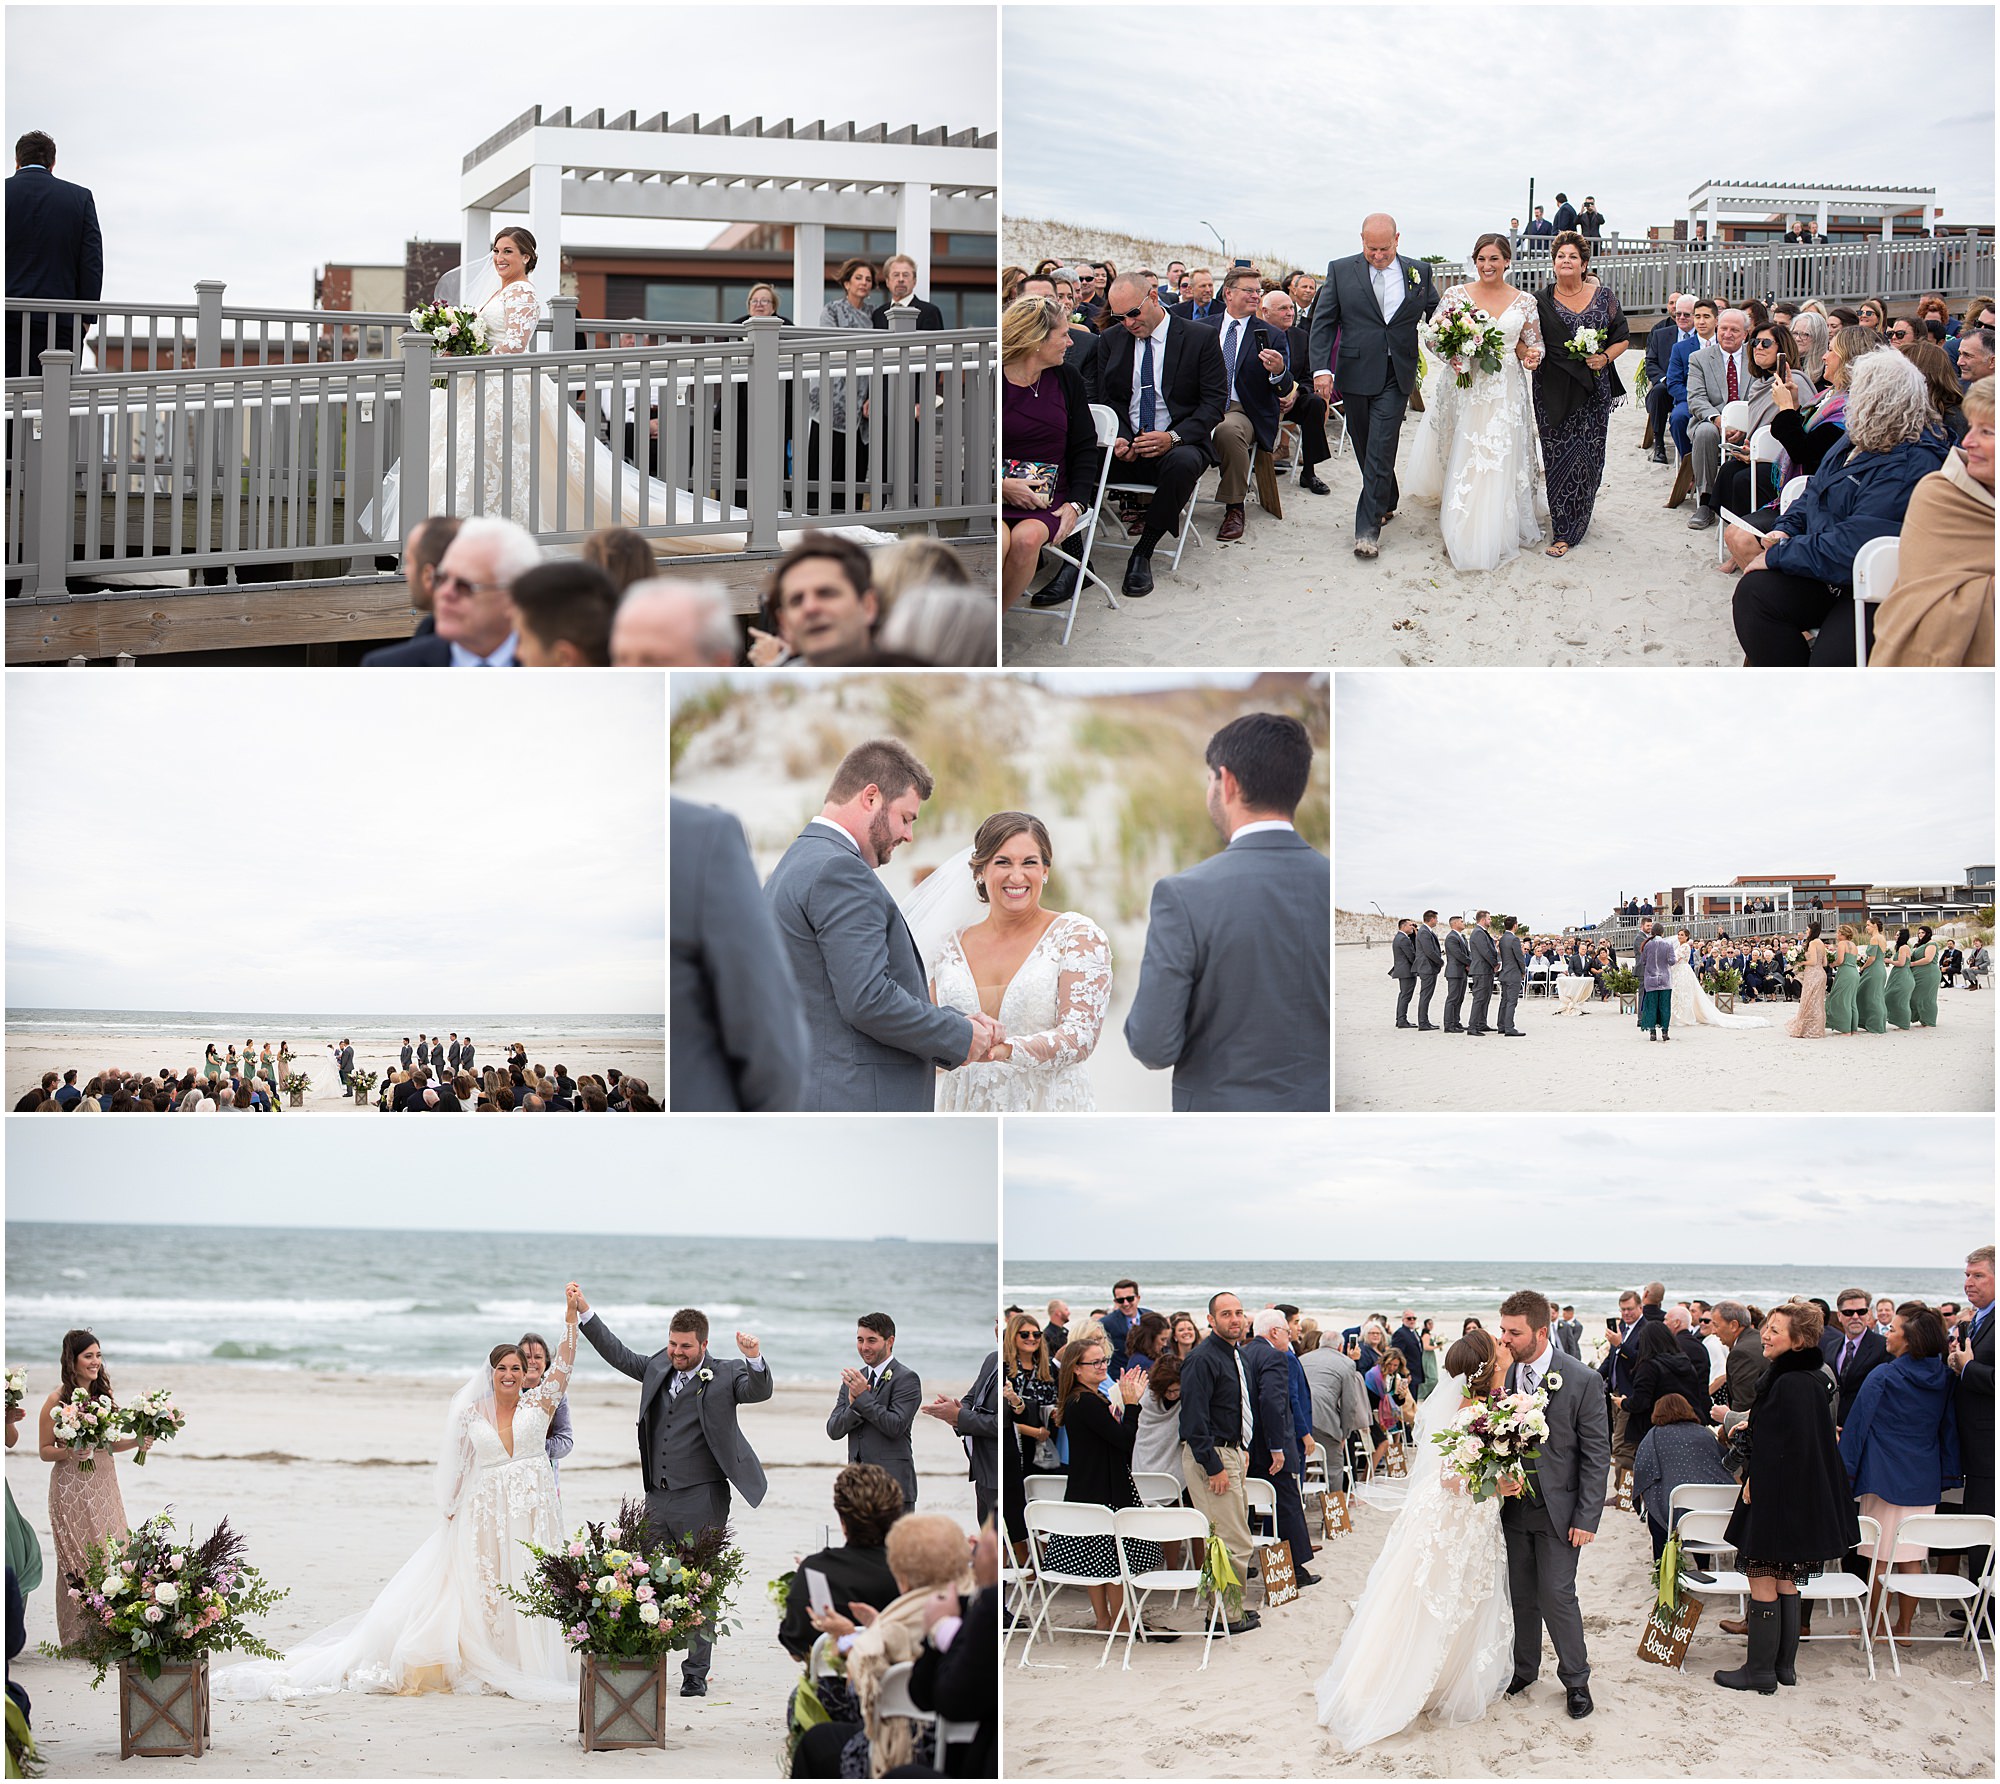 The beach ceremony at the Windrift Hotel in Avalon makes it the best Jersey Shore wedding venue